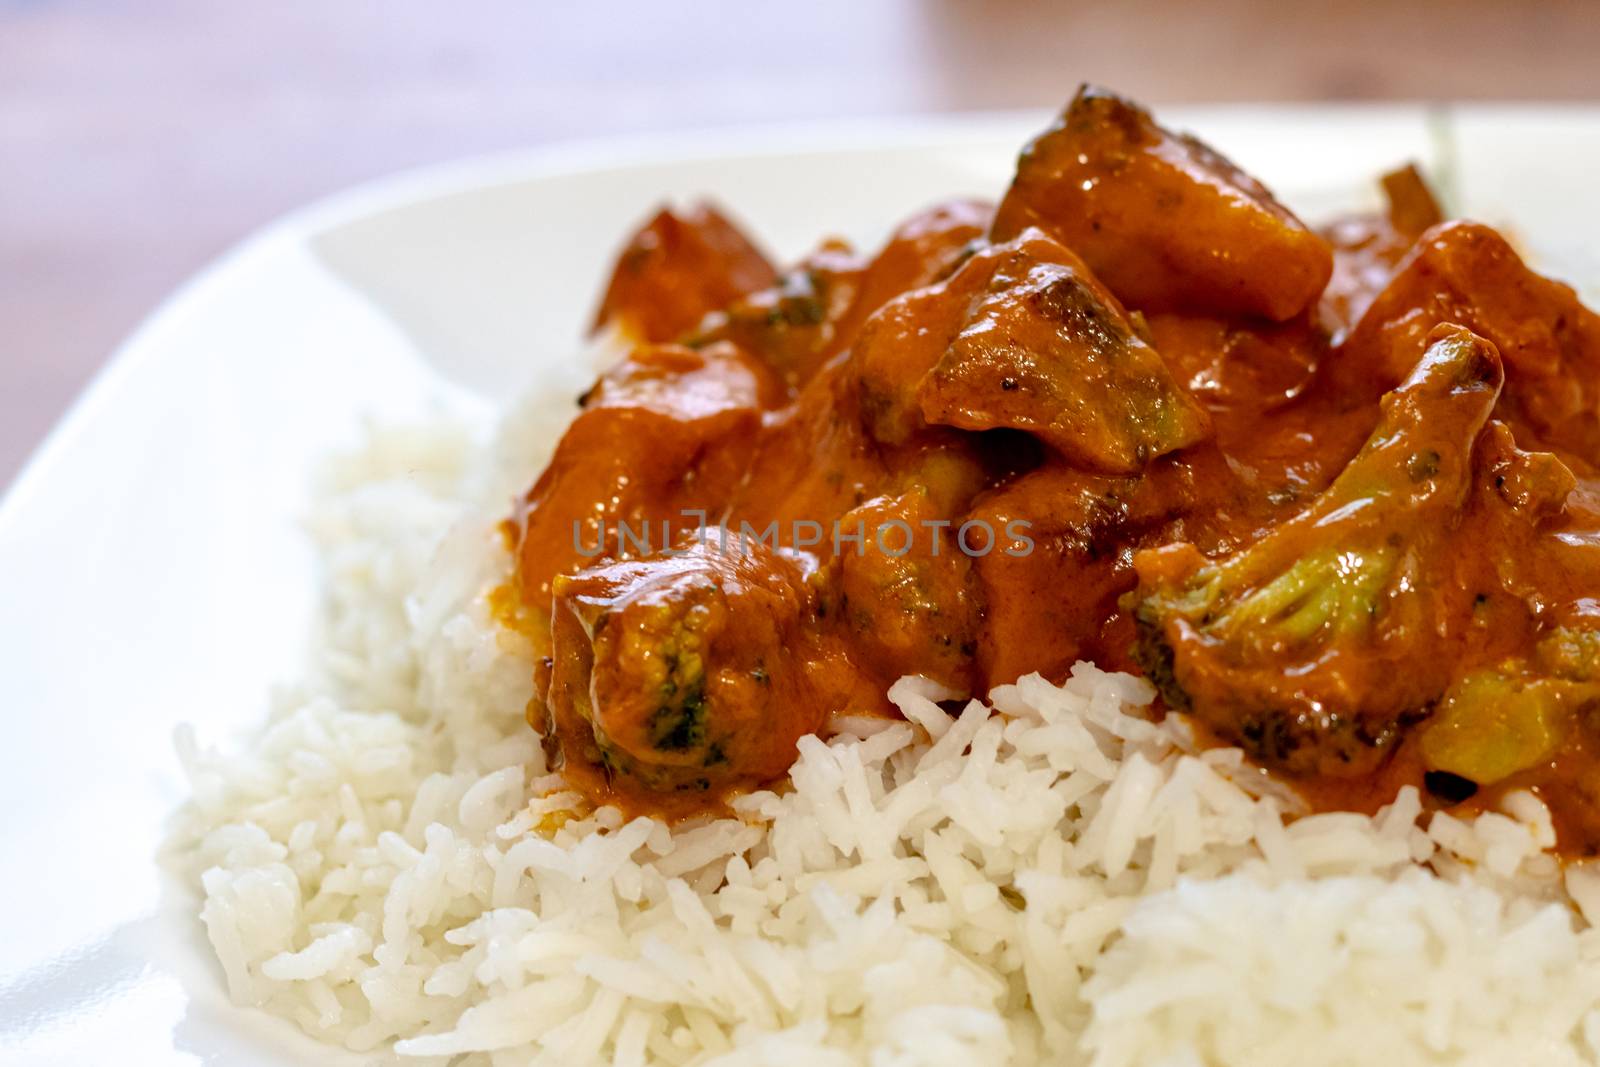 A vegetarian dish of broccoli and simulated chicken is served up with a butter chicken tomato sauce from Indian cuisine on a bed of basmati rice.